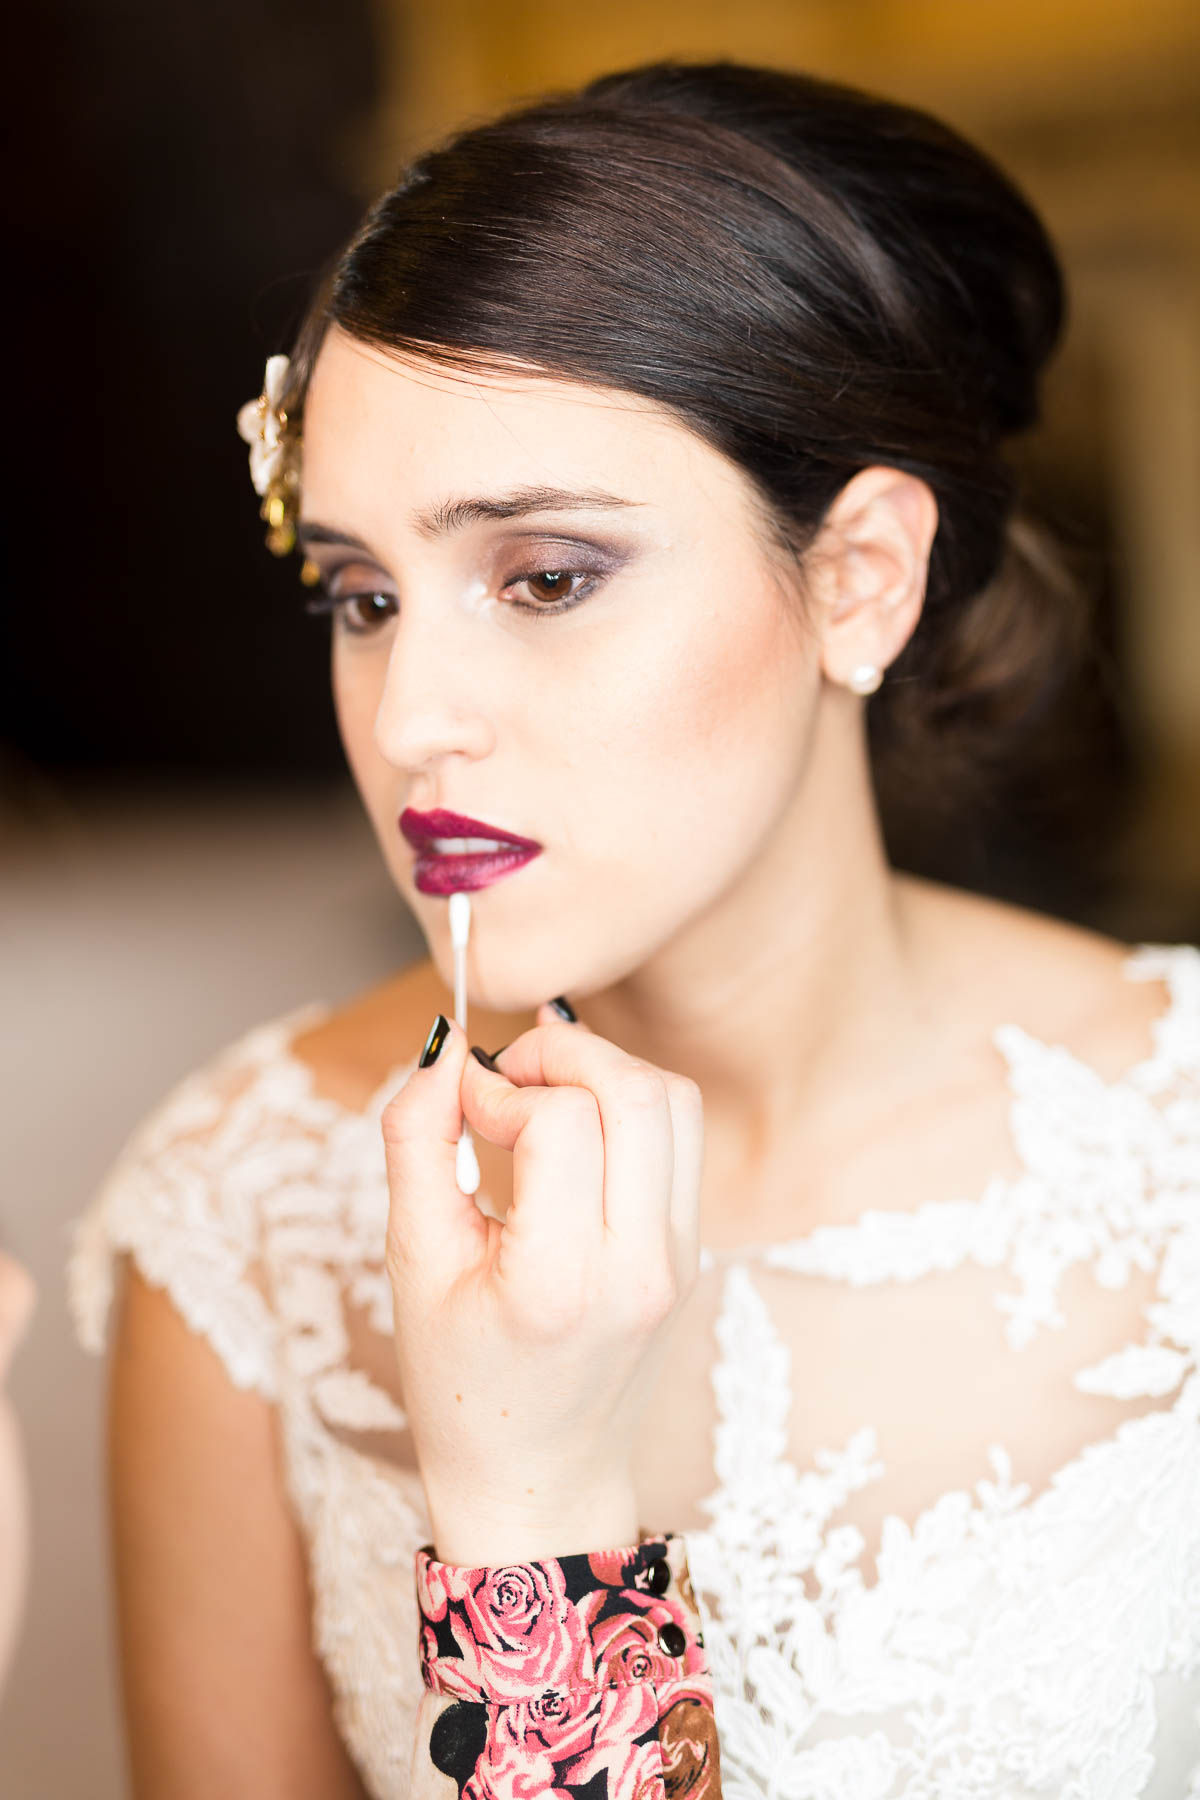 Red Berry and navy wedding ideas bedfordshire wedding makeup